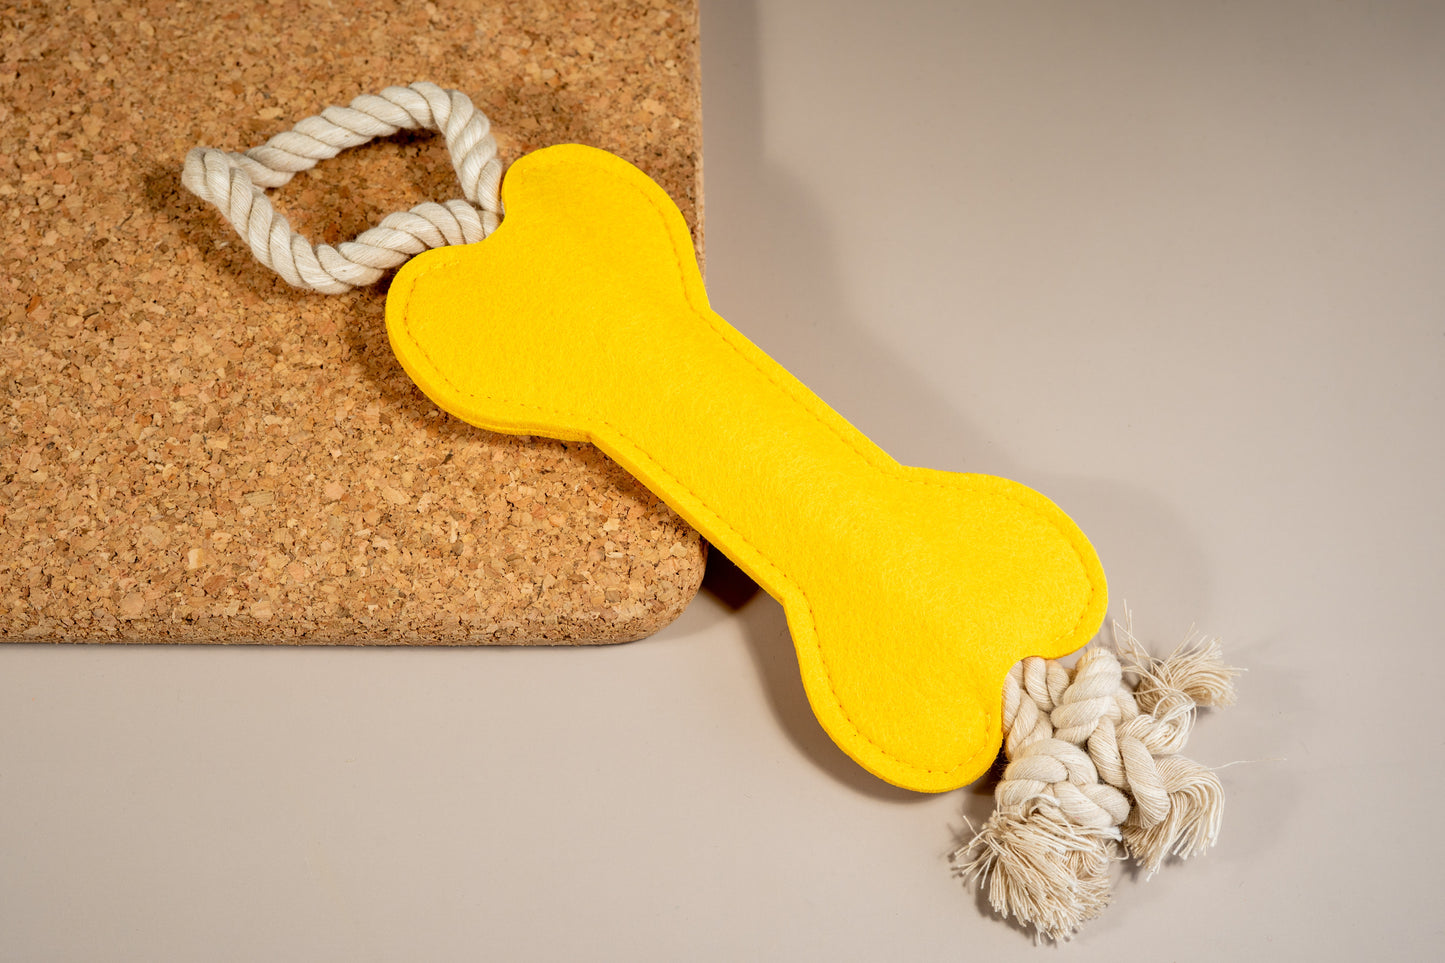 Bright yellow felt bone dog toy with rope at the ends placed on cork board.